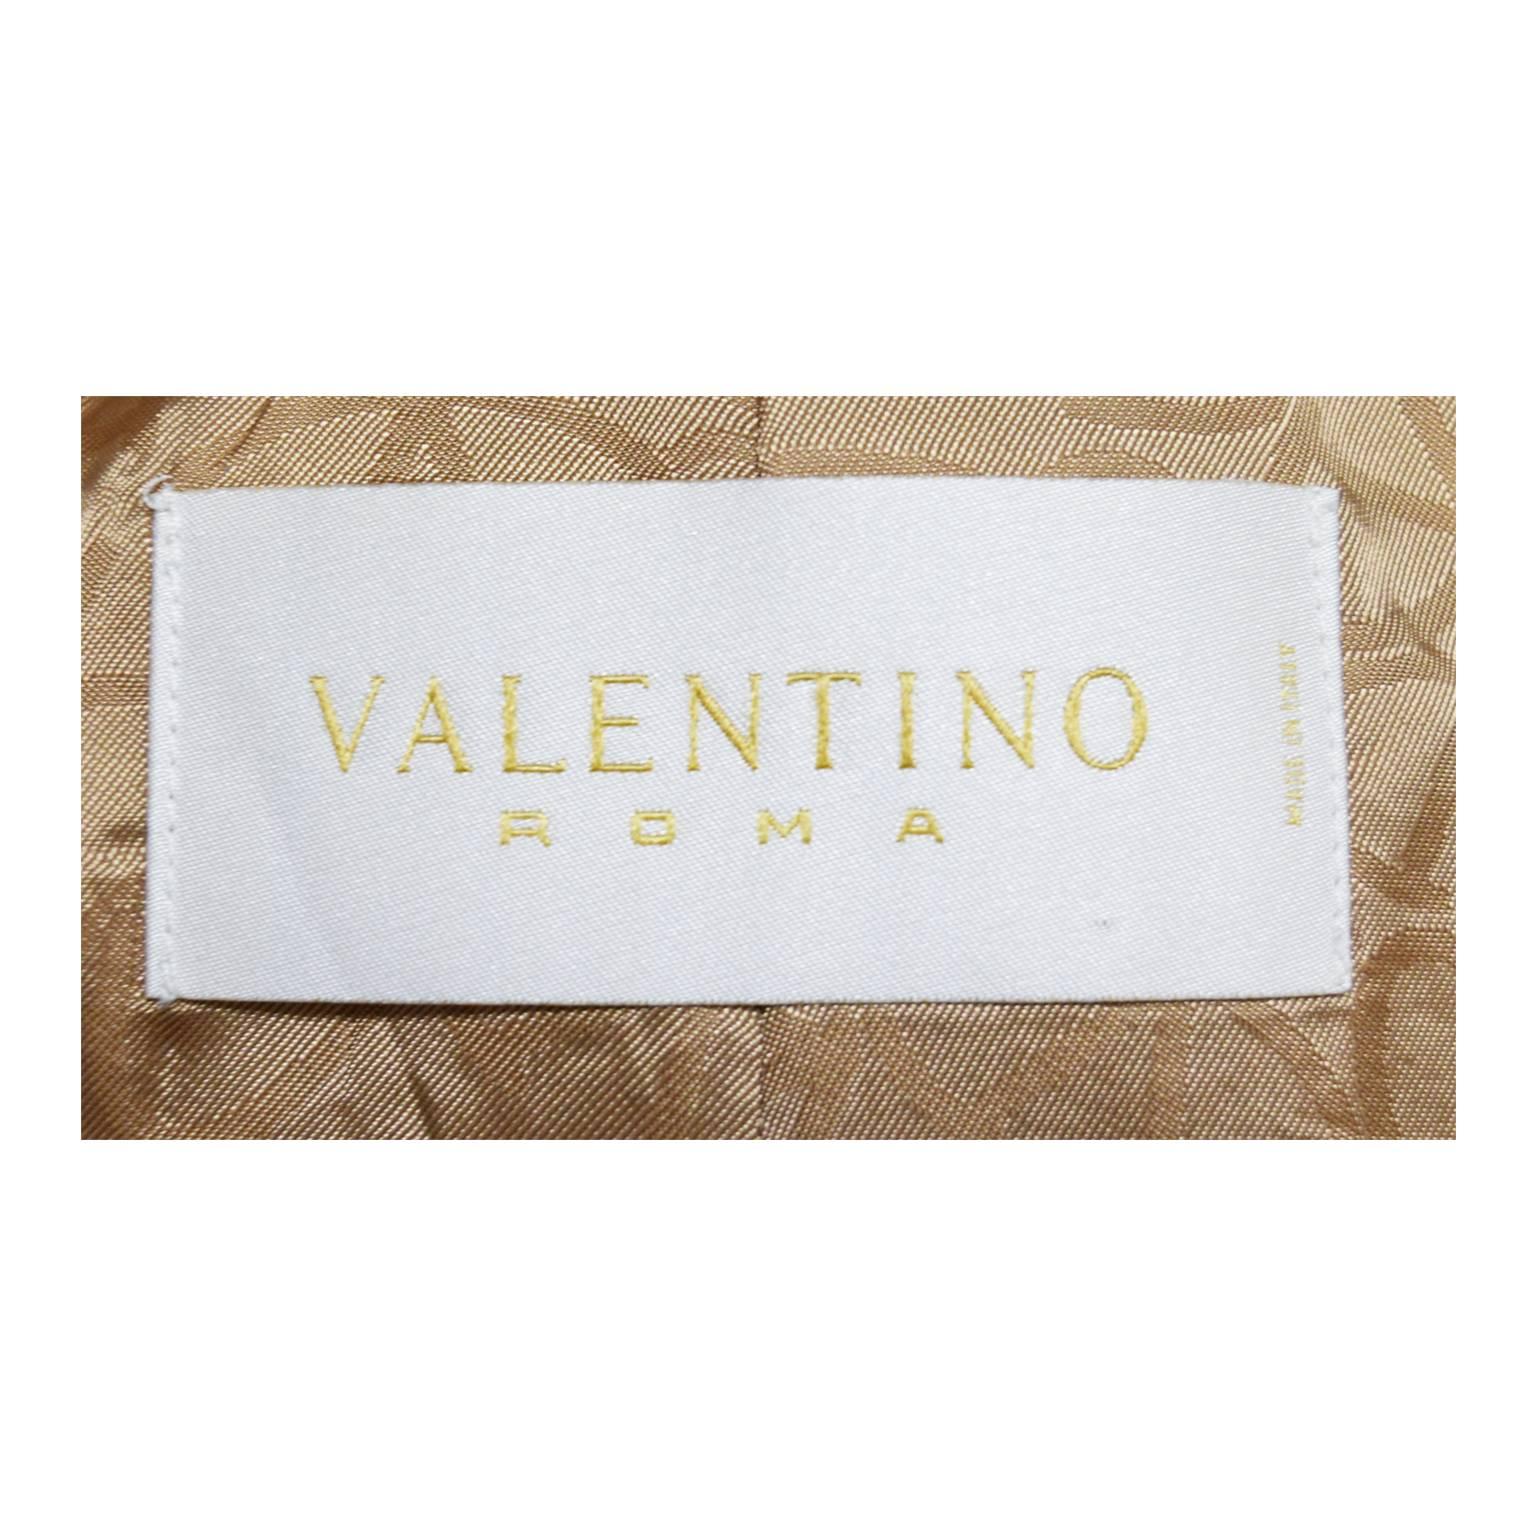 Valentino Roma Beige Yellow Twill Jacket For Sale 1